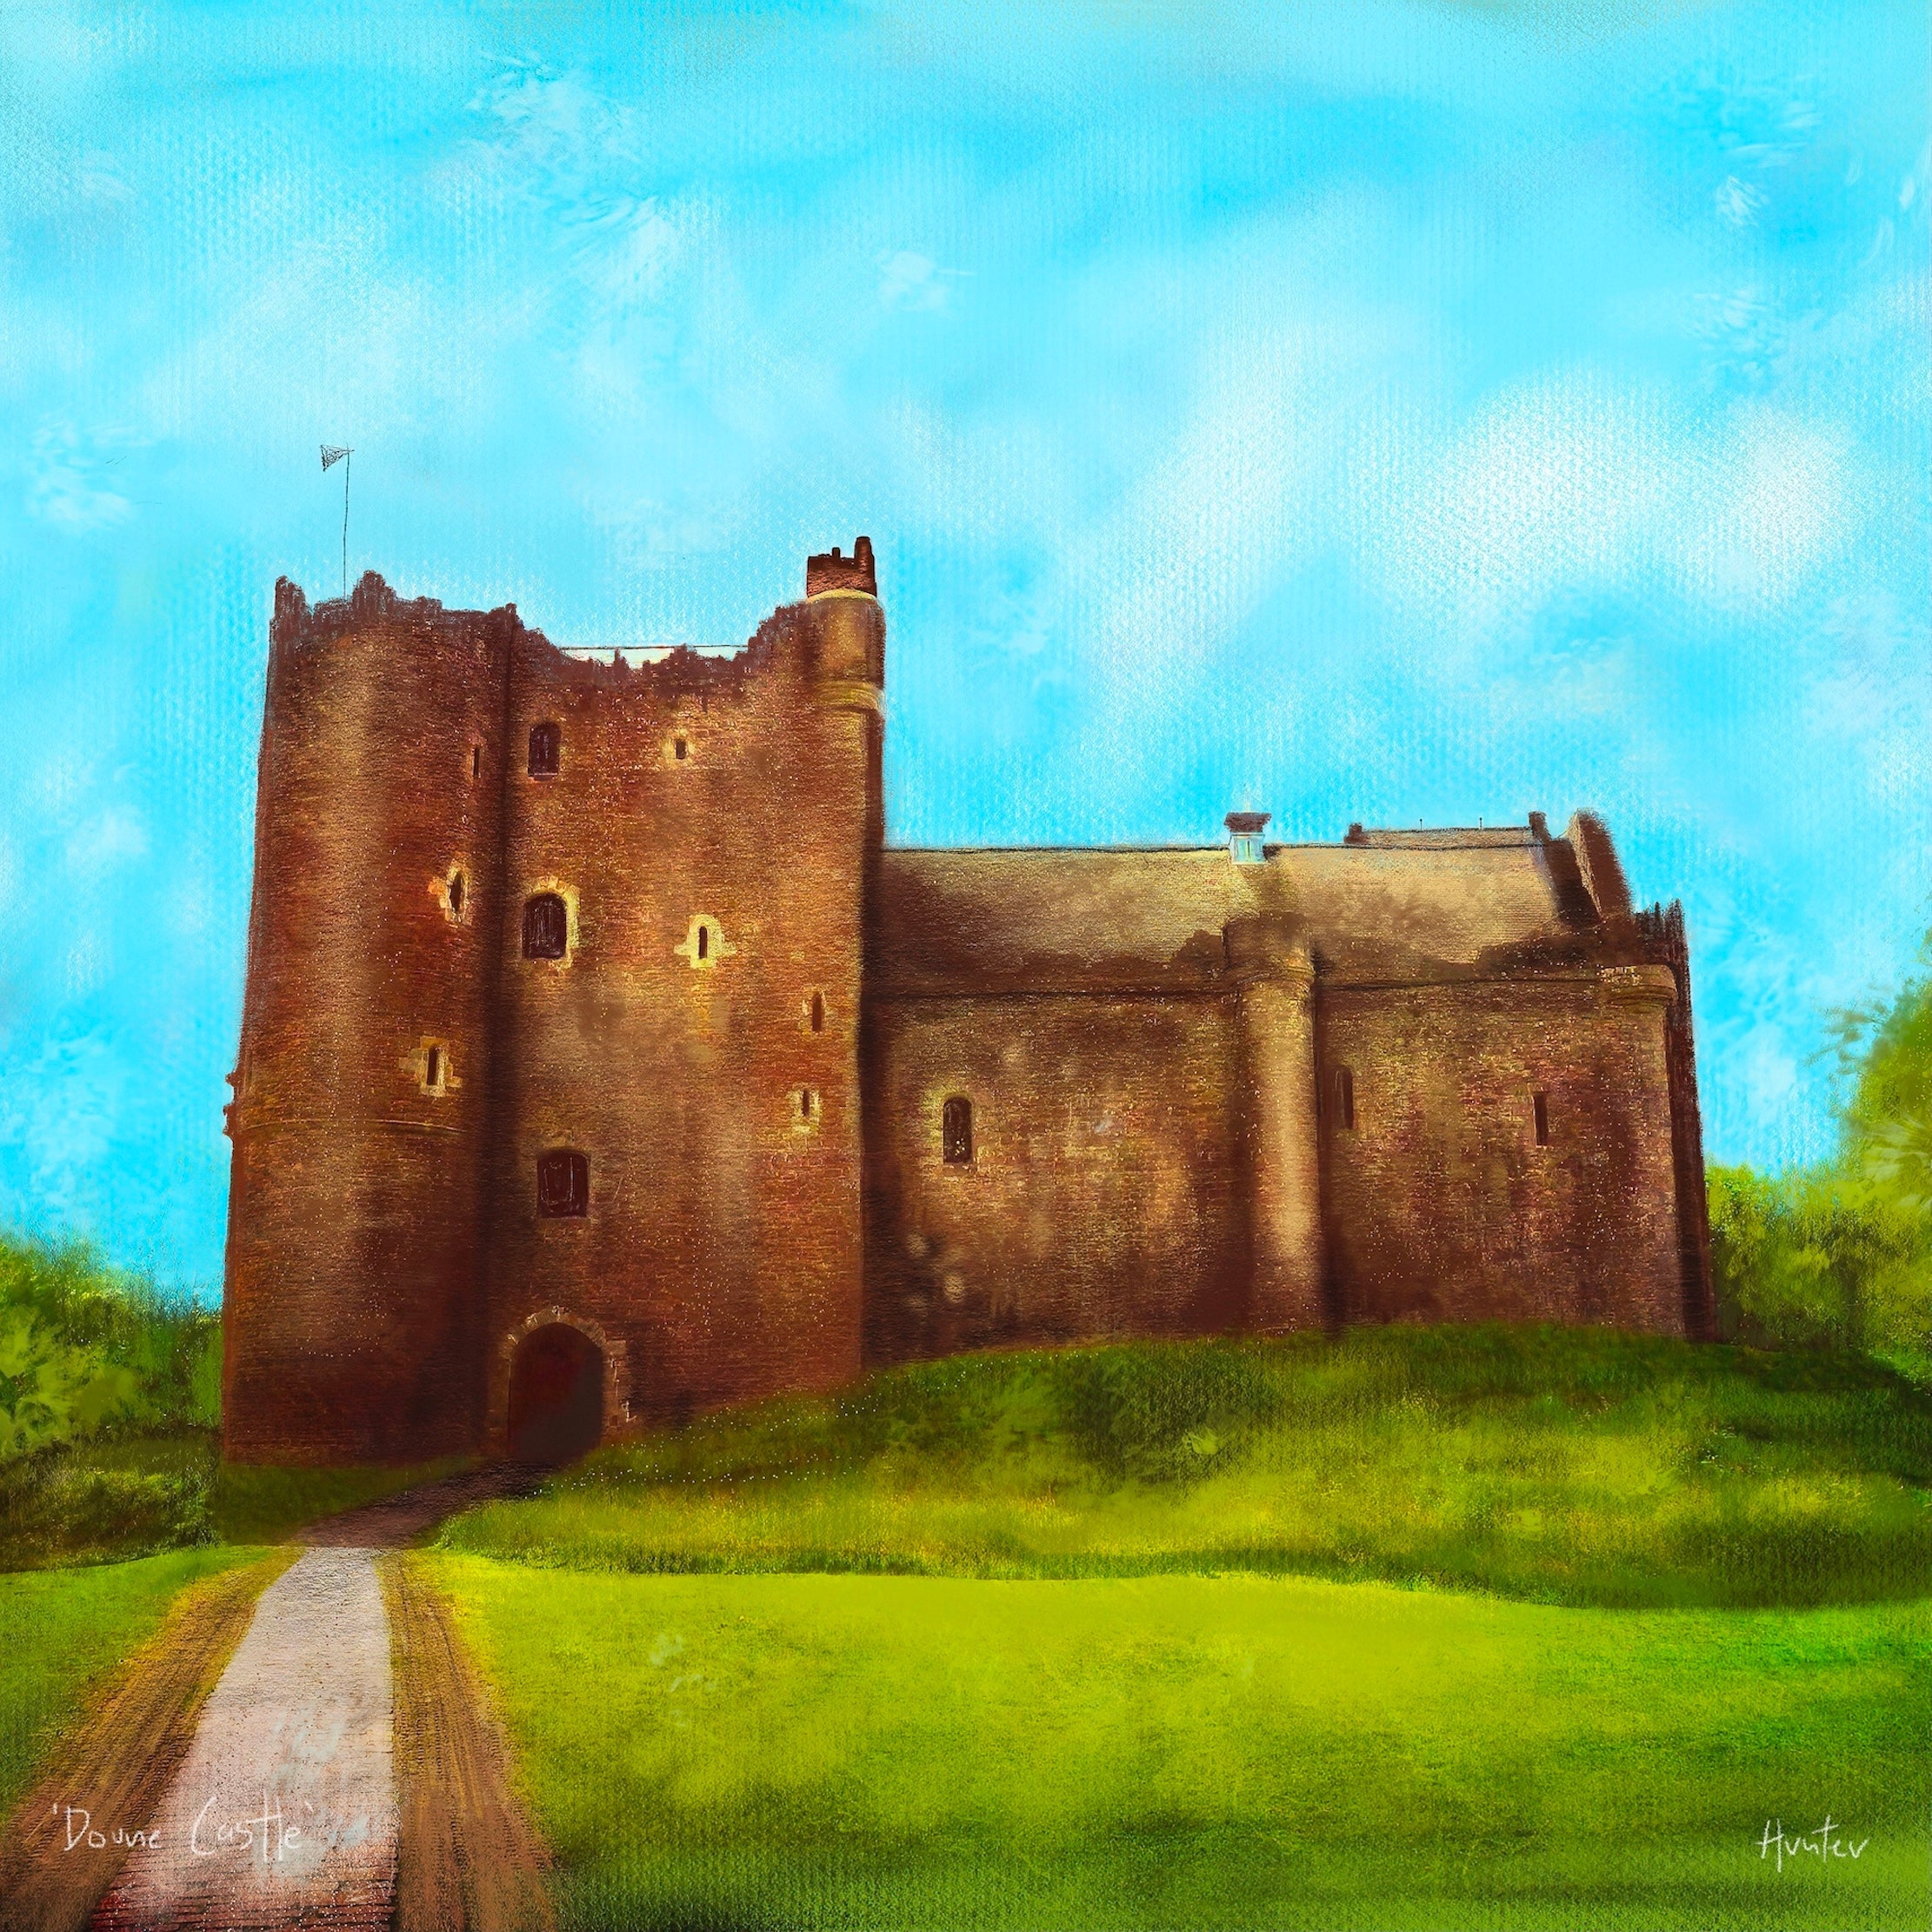 Doune Castle | Scotland In Your Pocket Art Print-Scotland In Your Pocket Framed Prints-Historic & Iconic Scotland Art Gallery-Mounted & Cello Bag: 12.5x12.5 cm-Black Frame-Paintings, Prints, Homeware, Art Gifts From Scotland By Scottish Artist Kevin Hunter